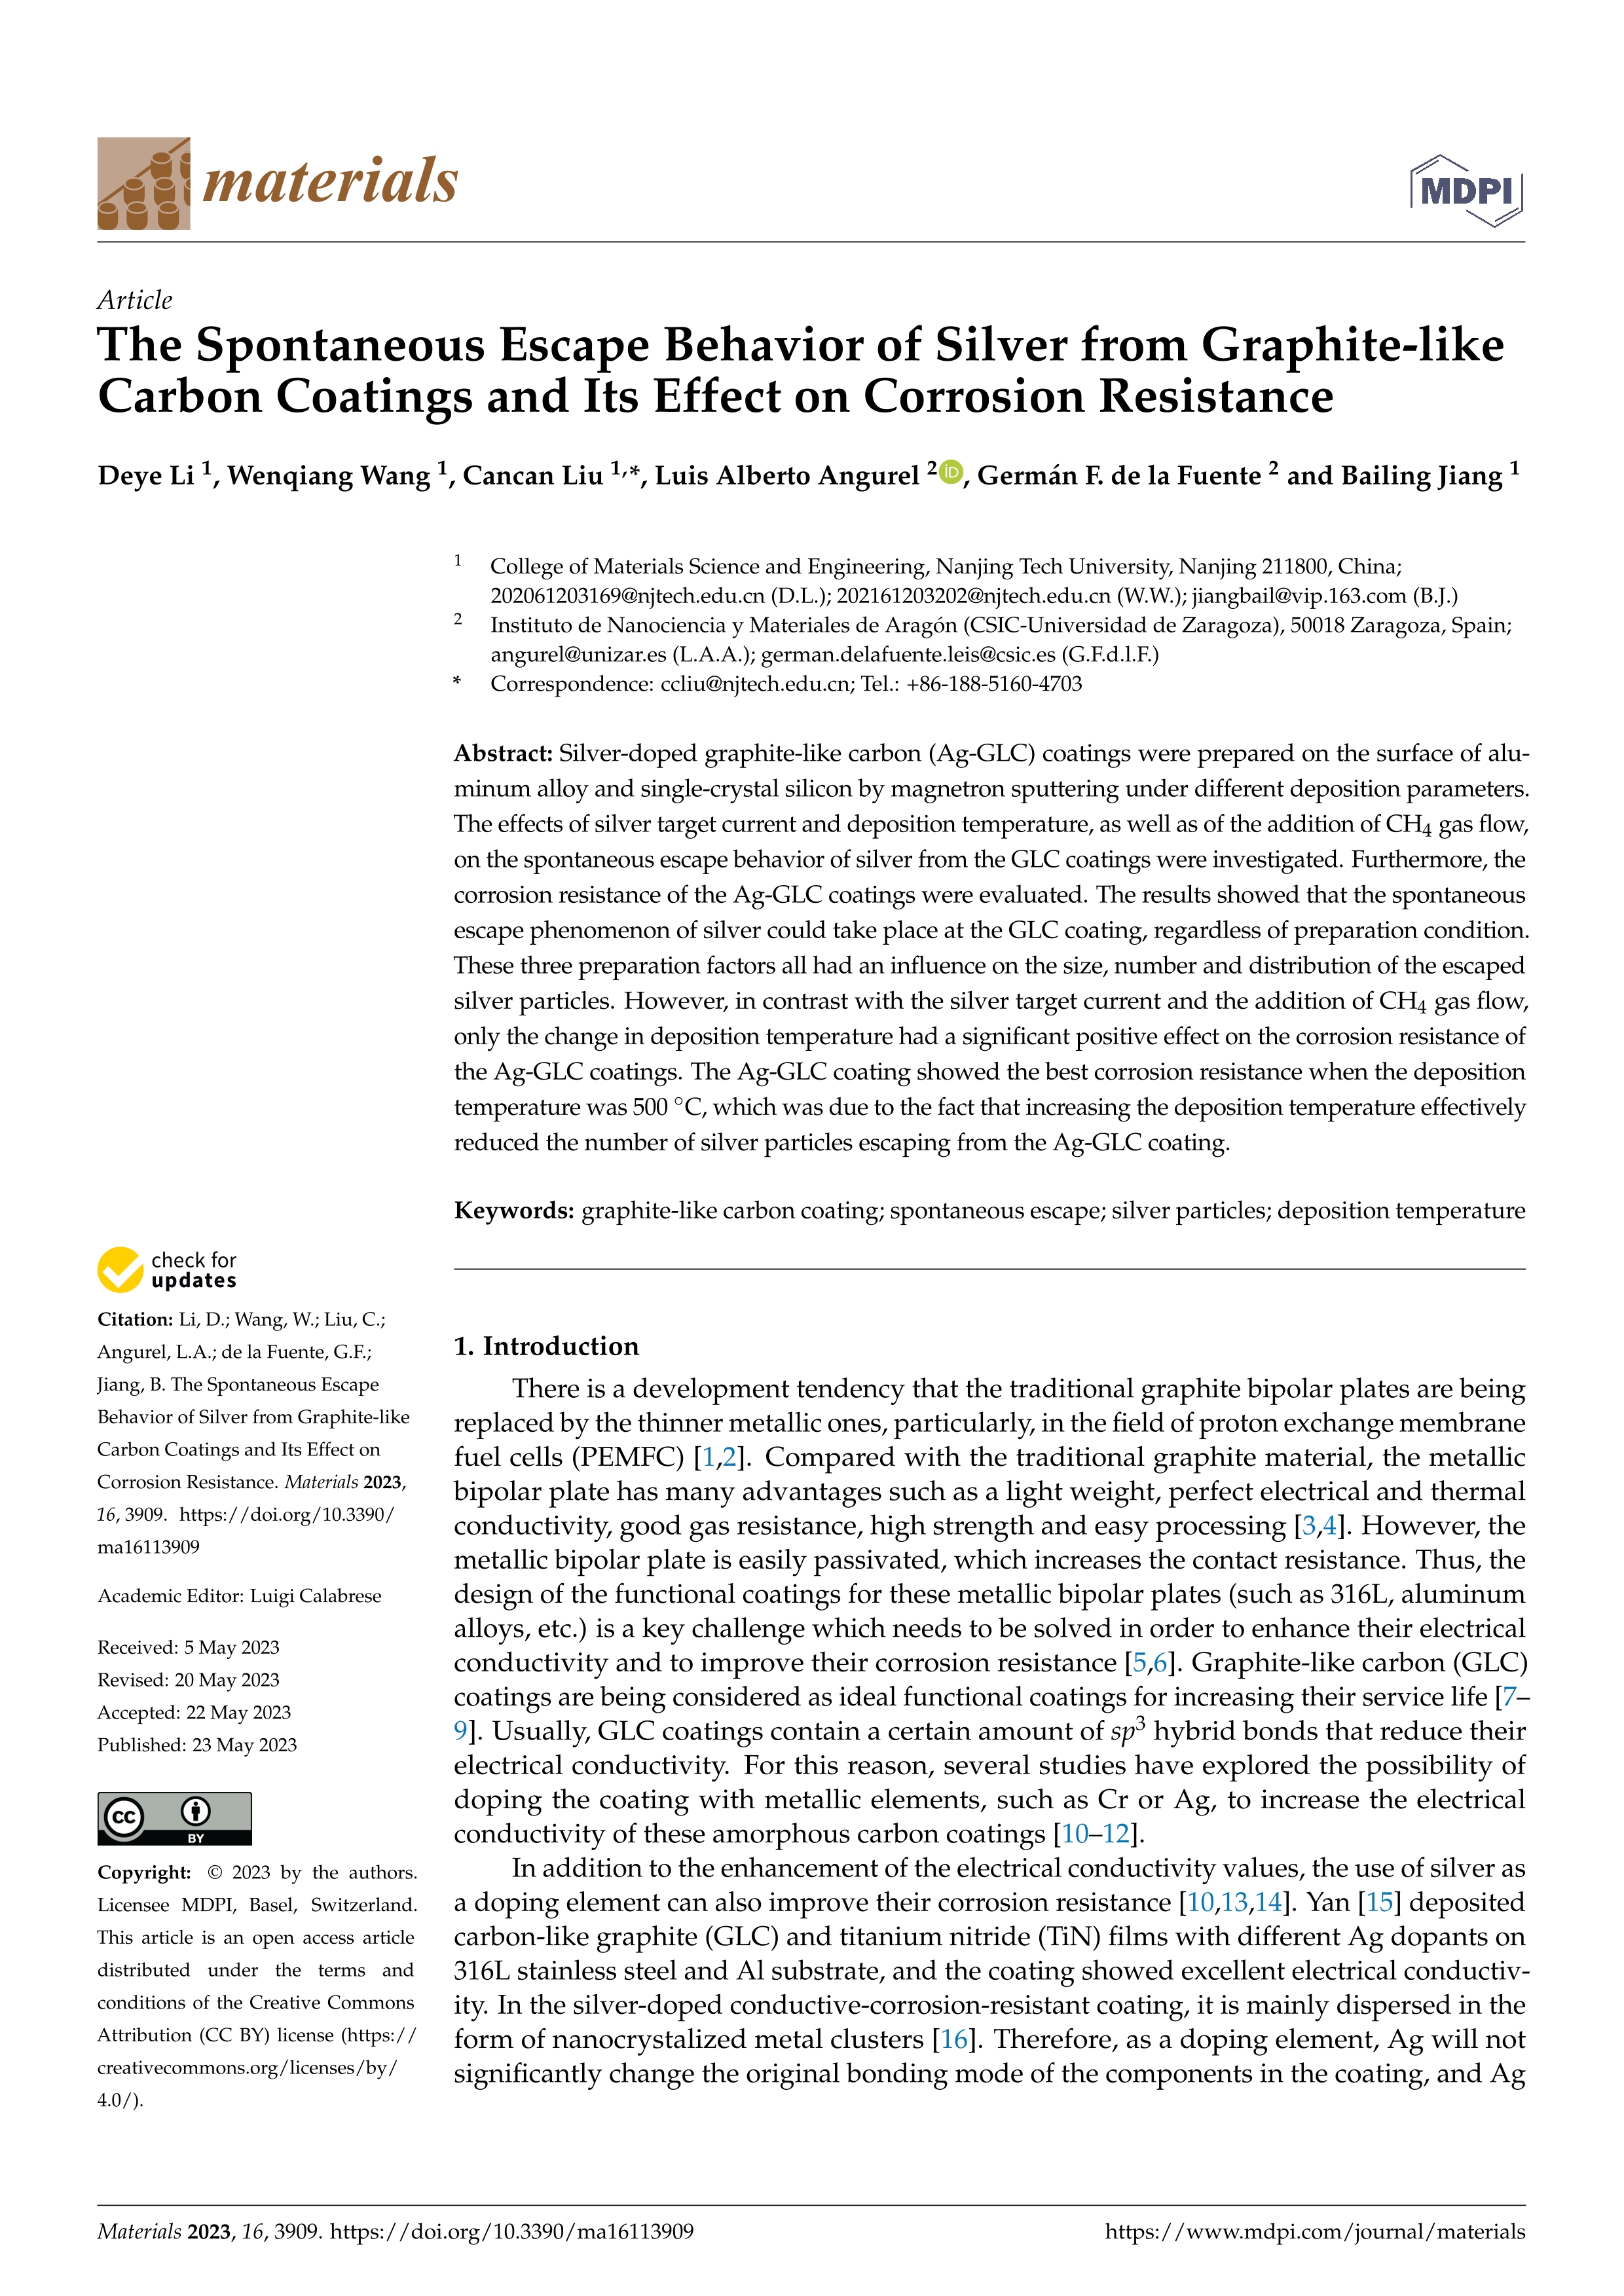 The spontaneous escape behavior of silver from graphite-like carbon coatings and its effect on corrosion resistance